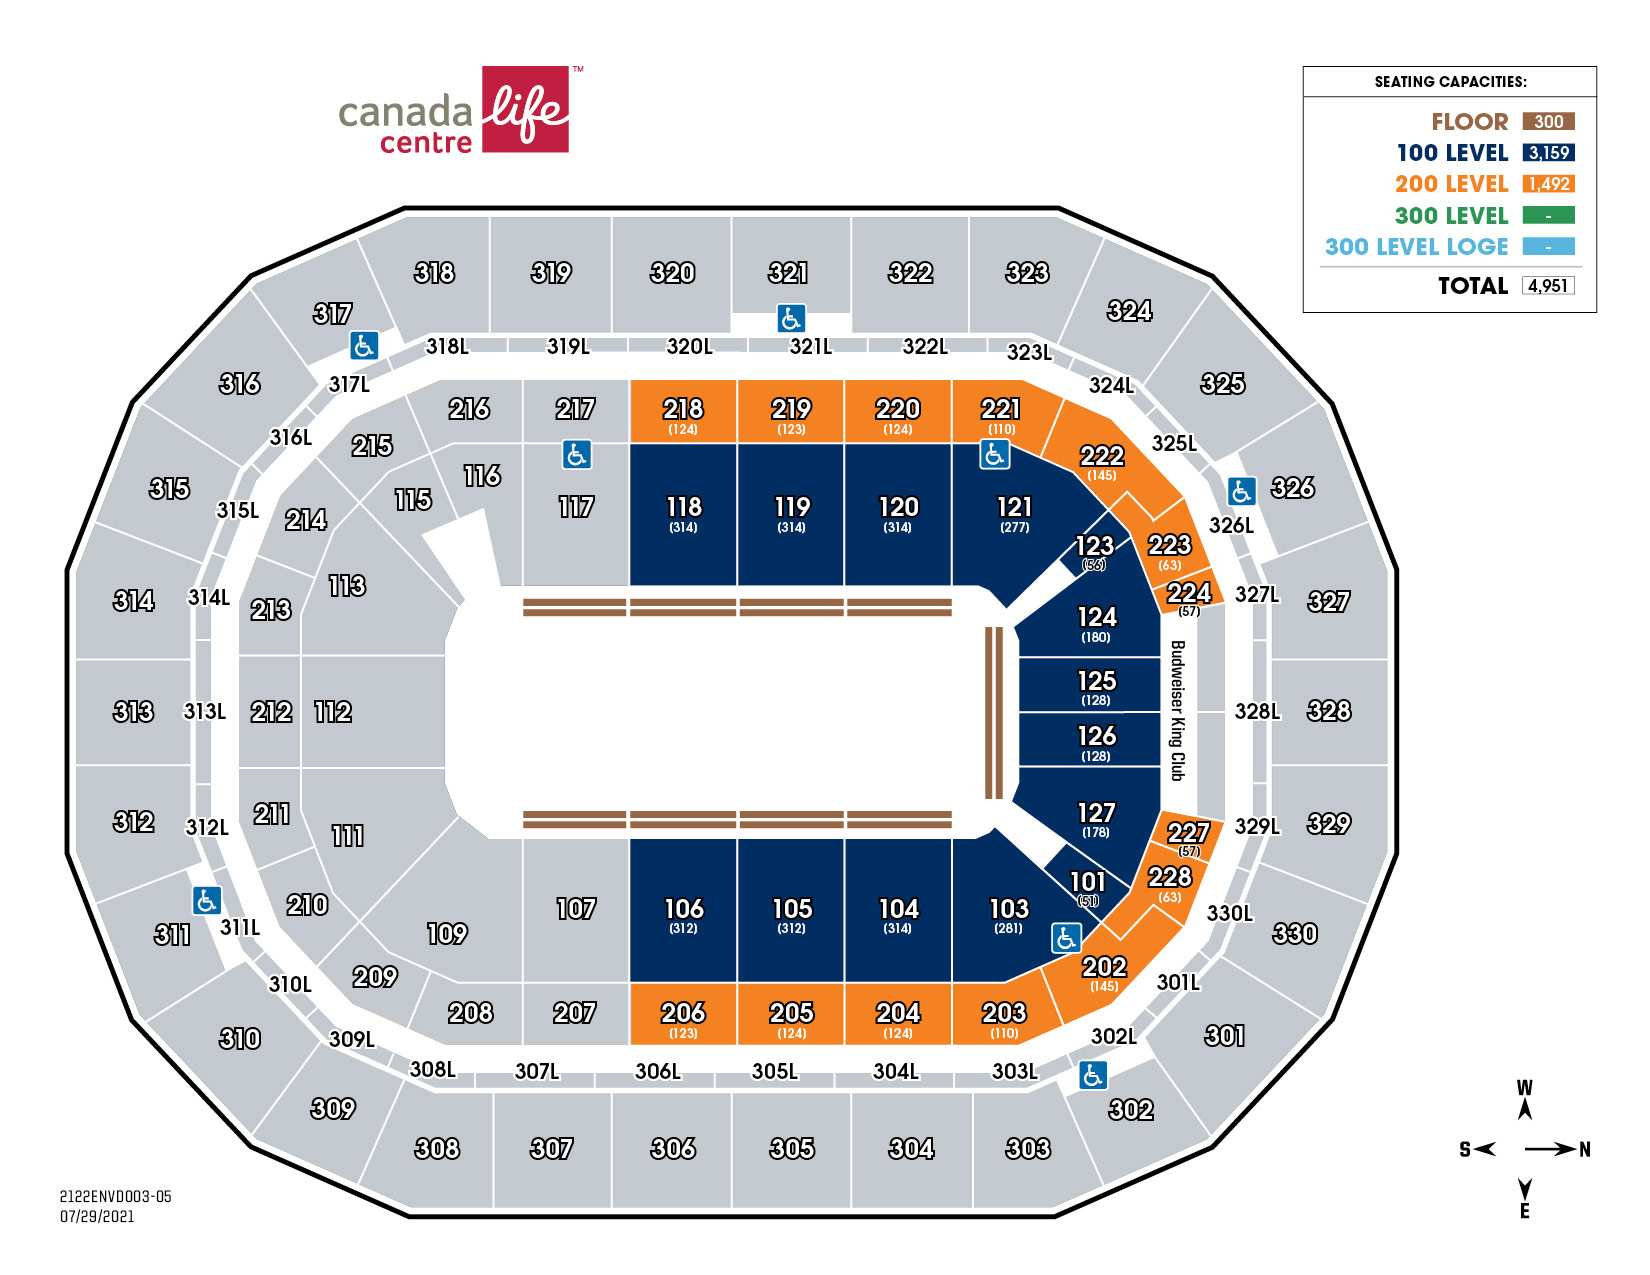 Canada Life Centre seating plan